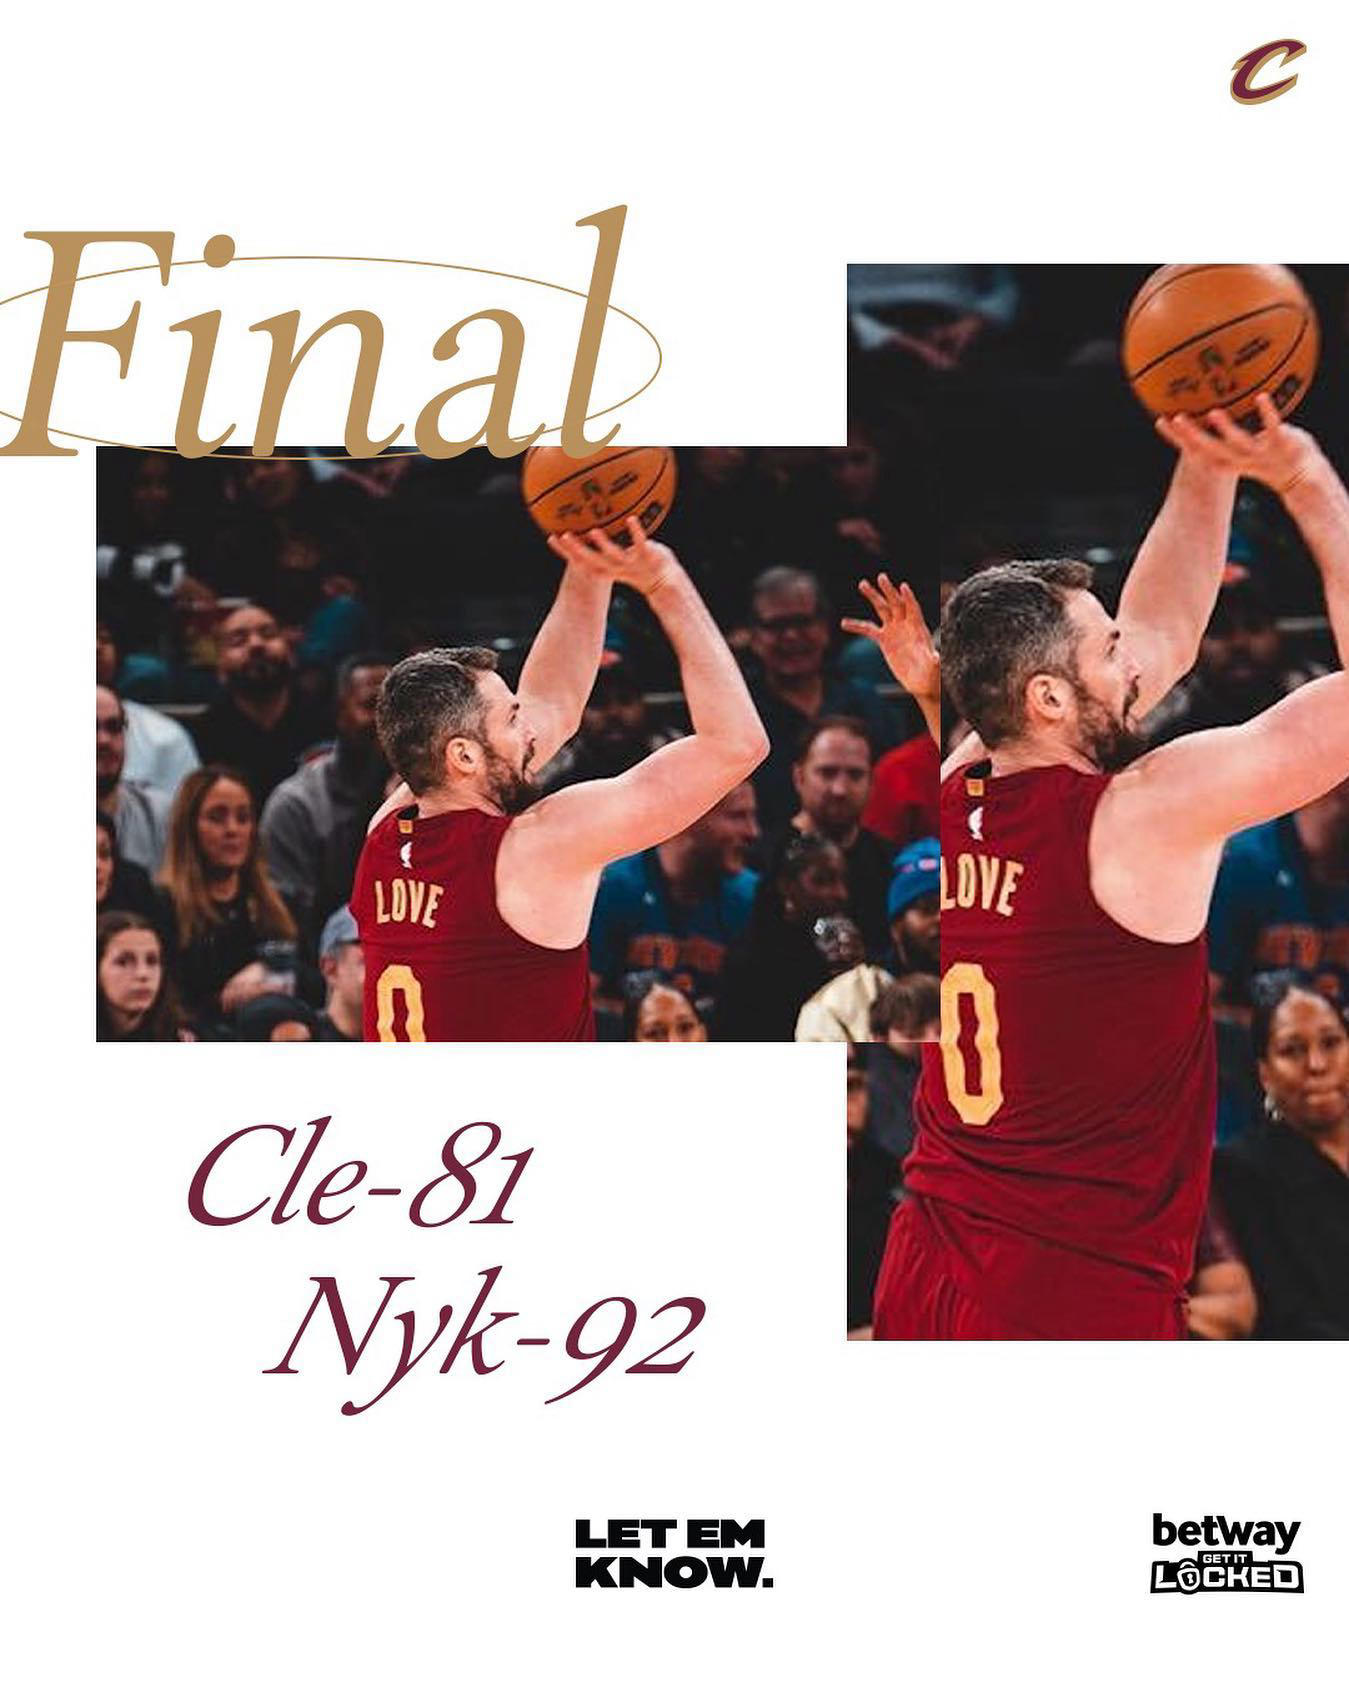 Cleveland Cavaliers - Back home on Tuesday